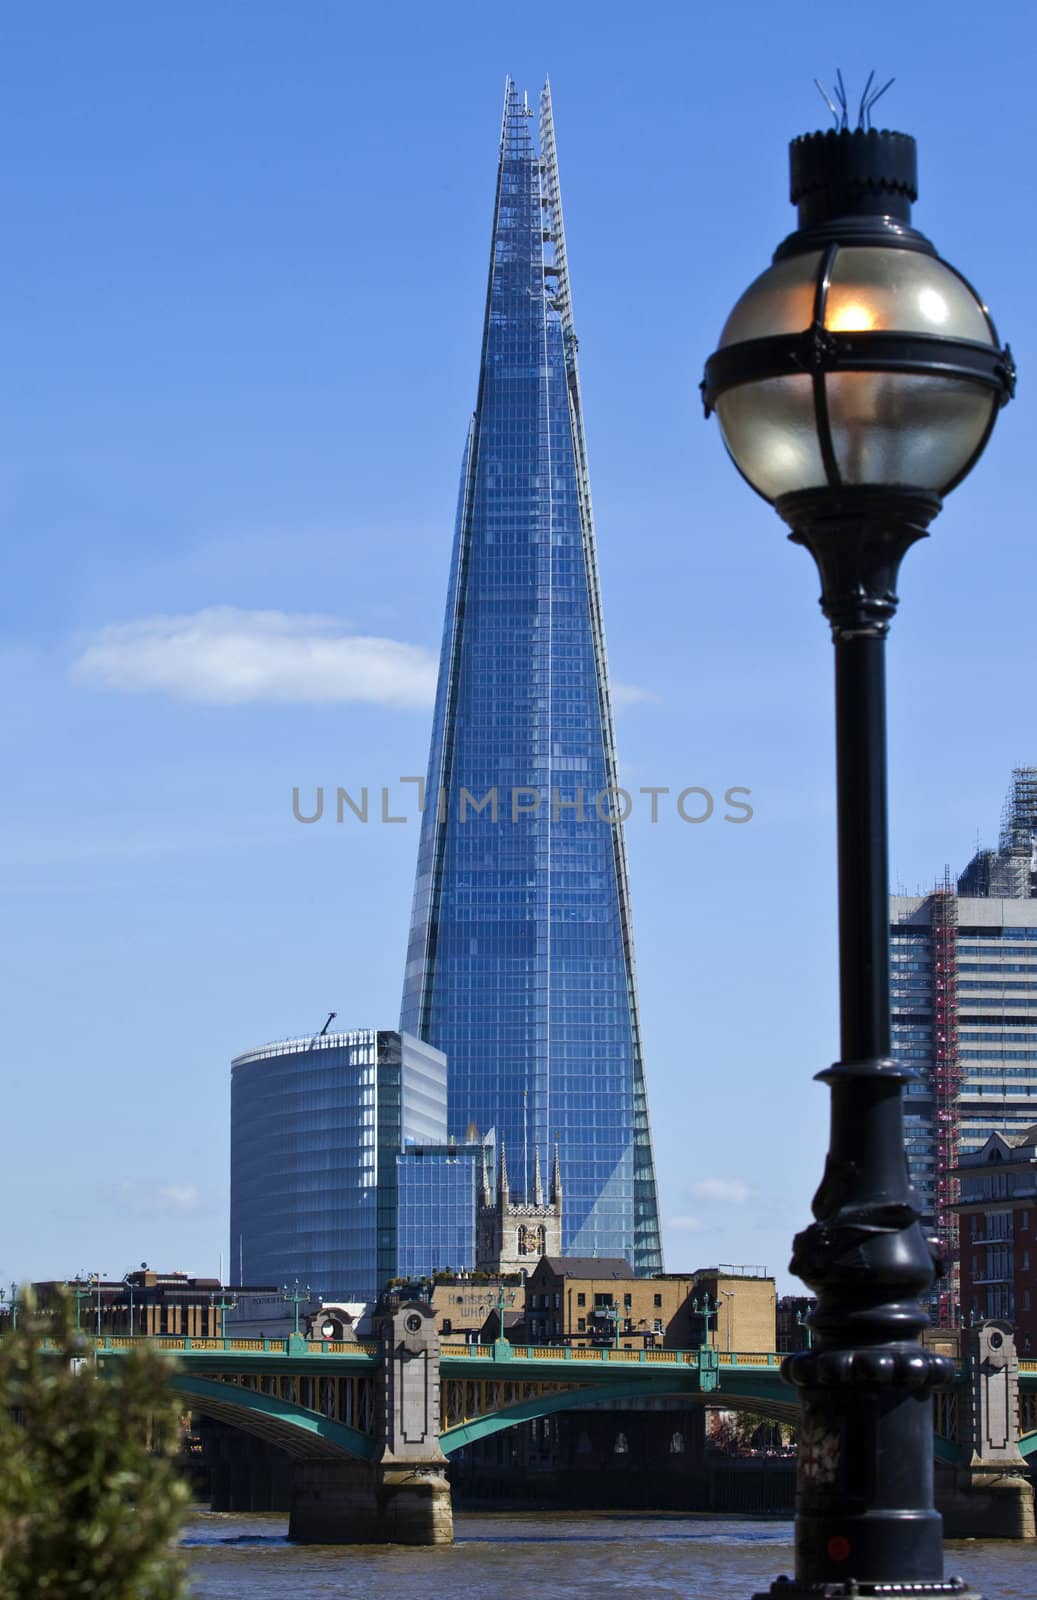 A view across the River Thames, taking in the sights of the Shard, Southwark Cathedral and Southwark Bridge in London.